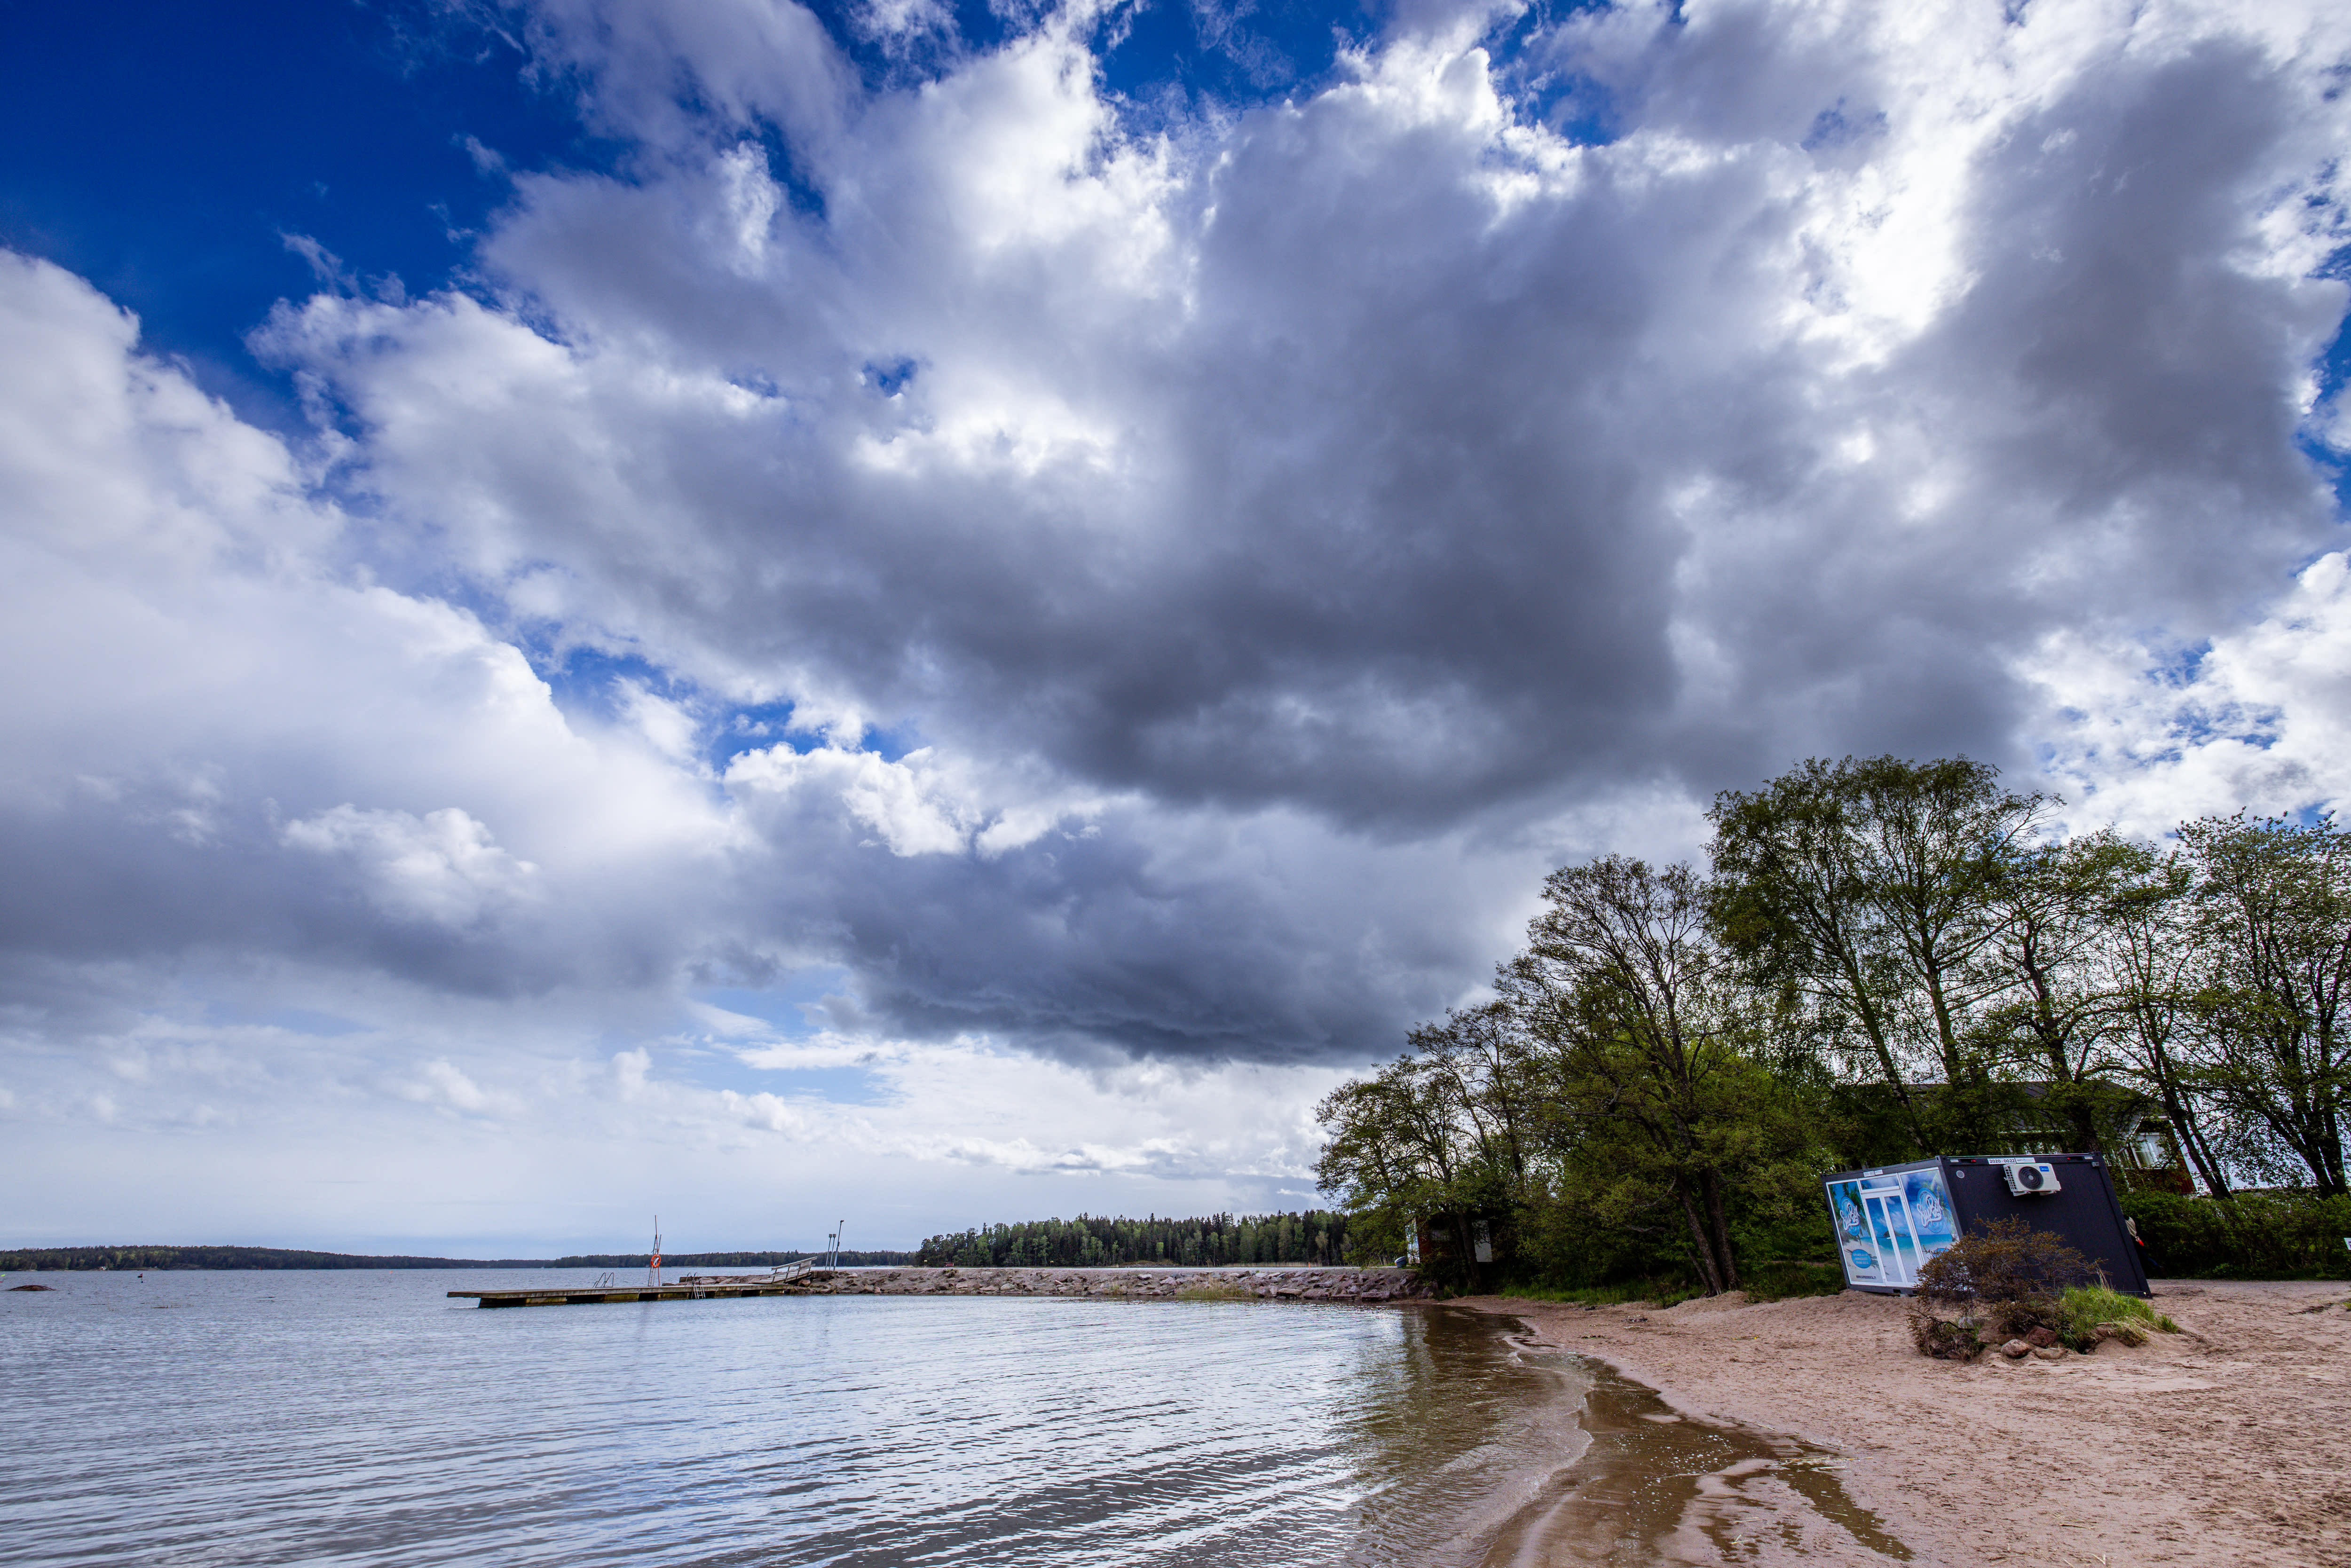 Windy, wet Wednesday in stock for southern Central Finland